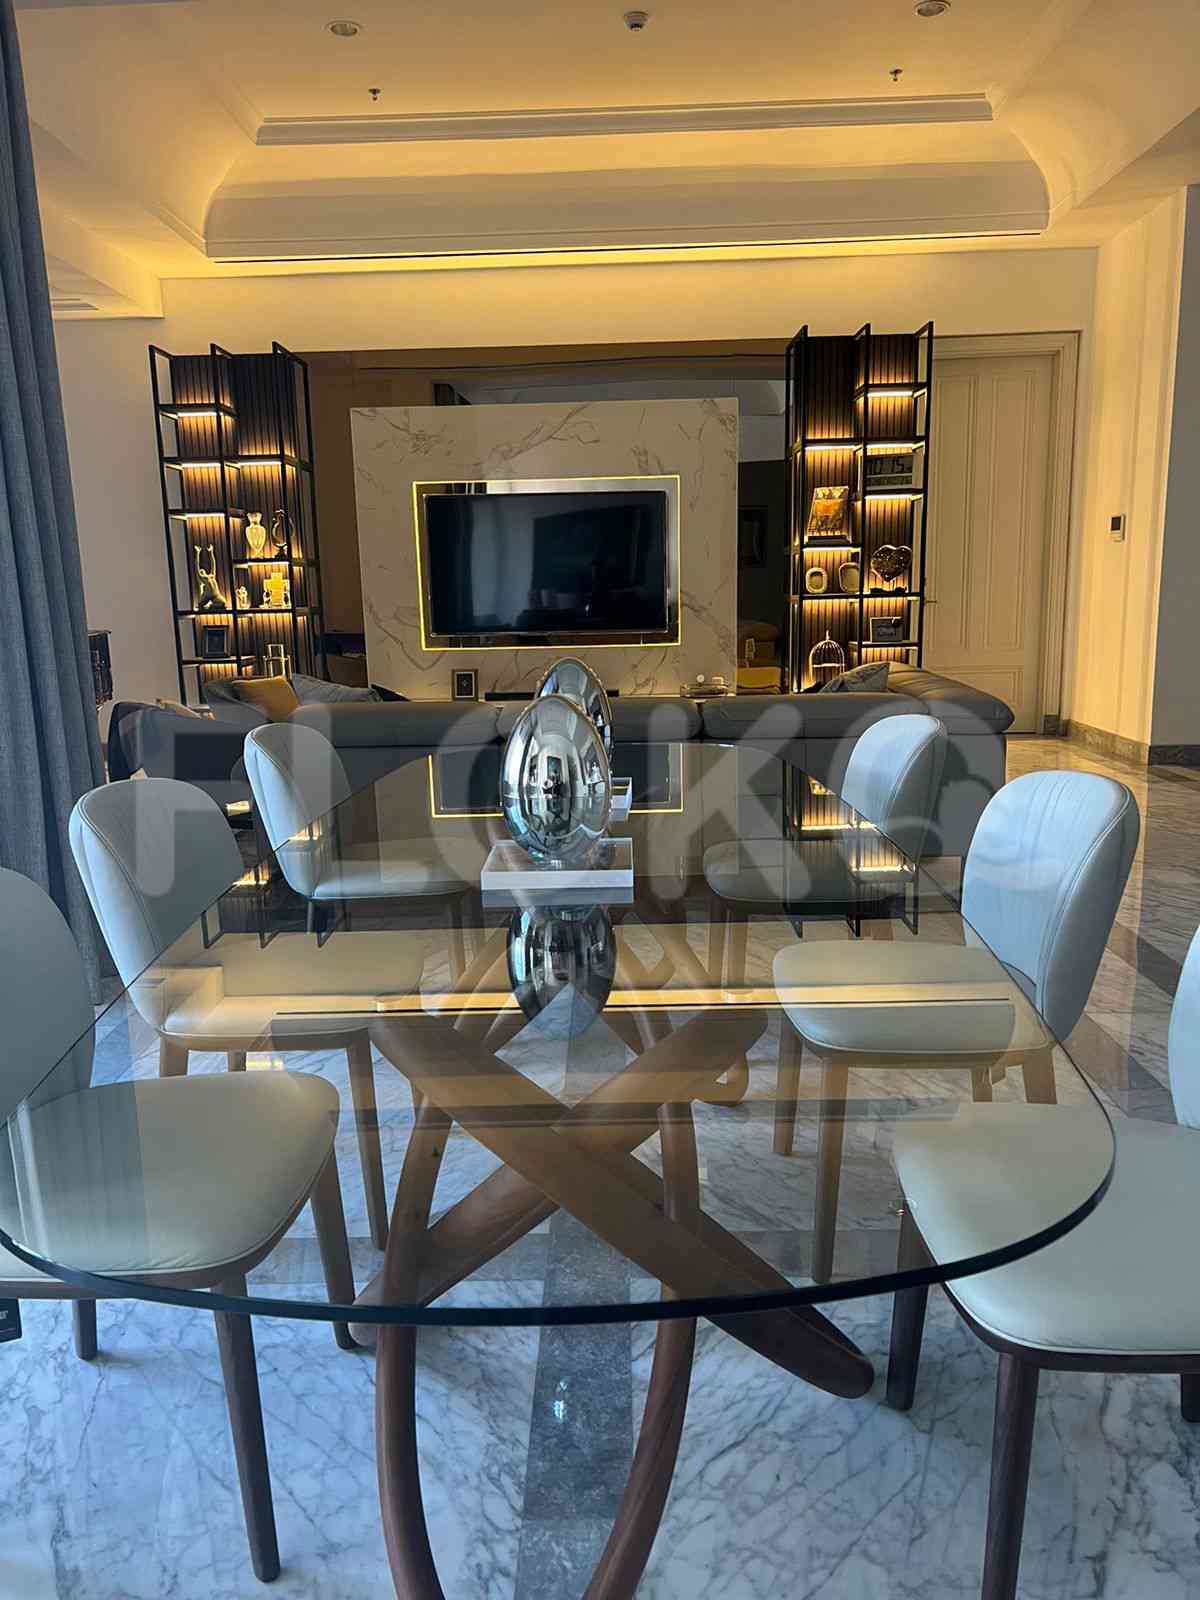 4 Bedroom on 15th Floor for Rent in The Langham Hotel and Residence - fsc693 3